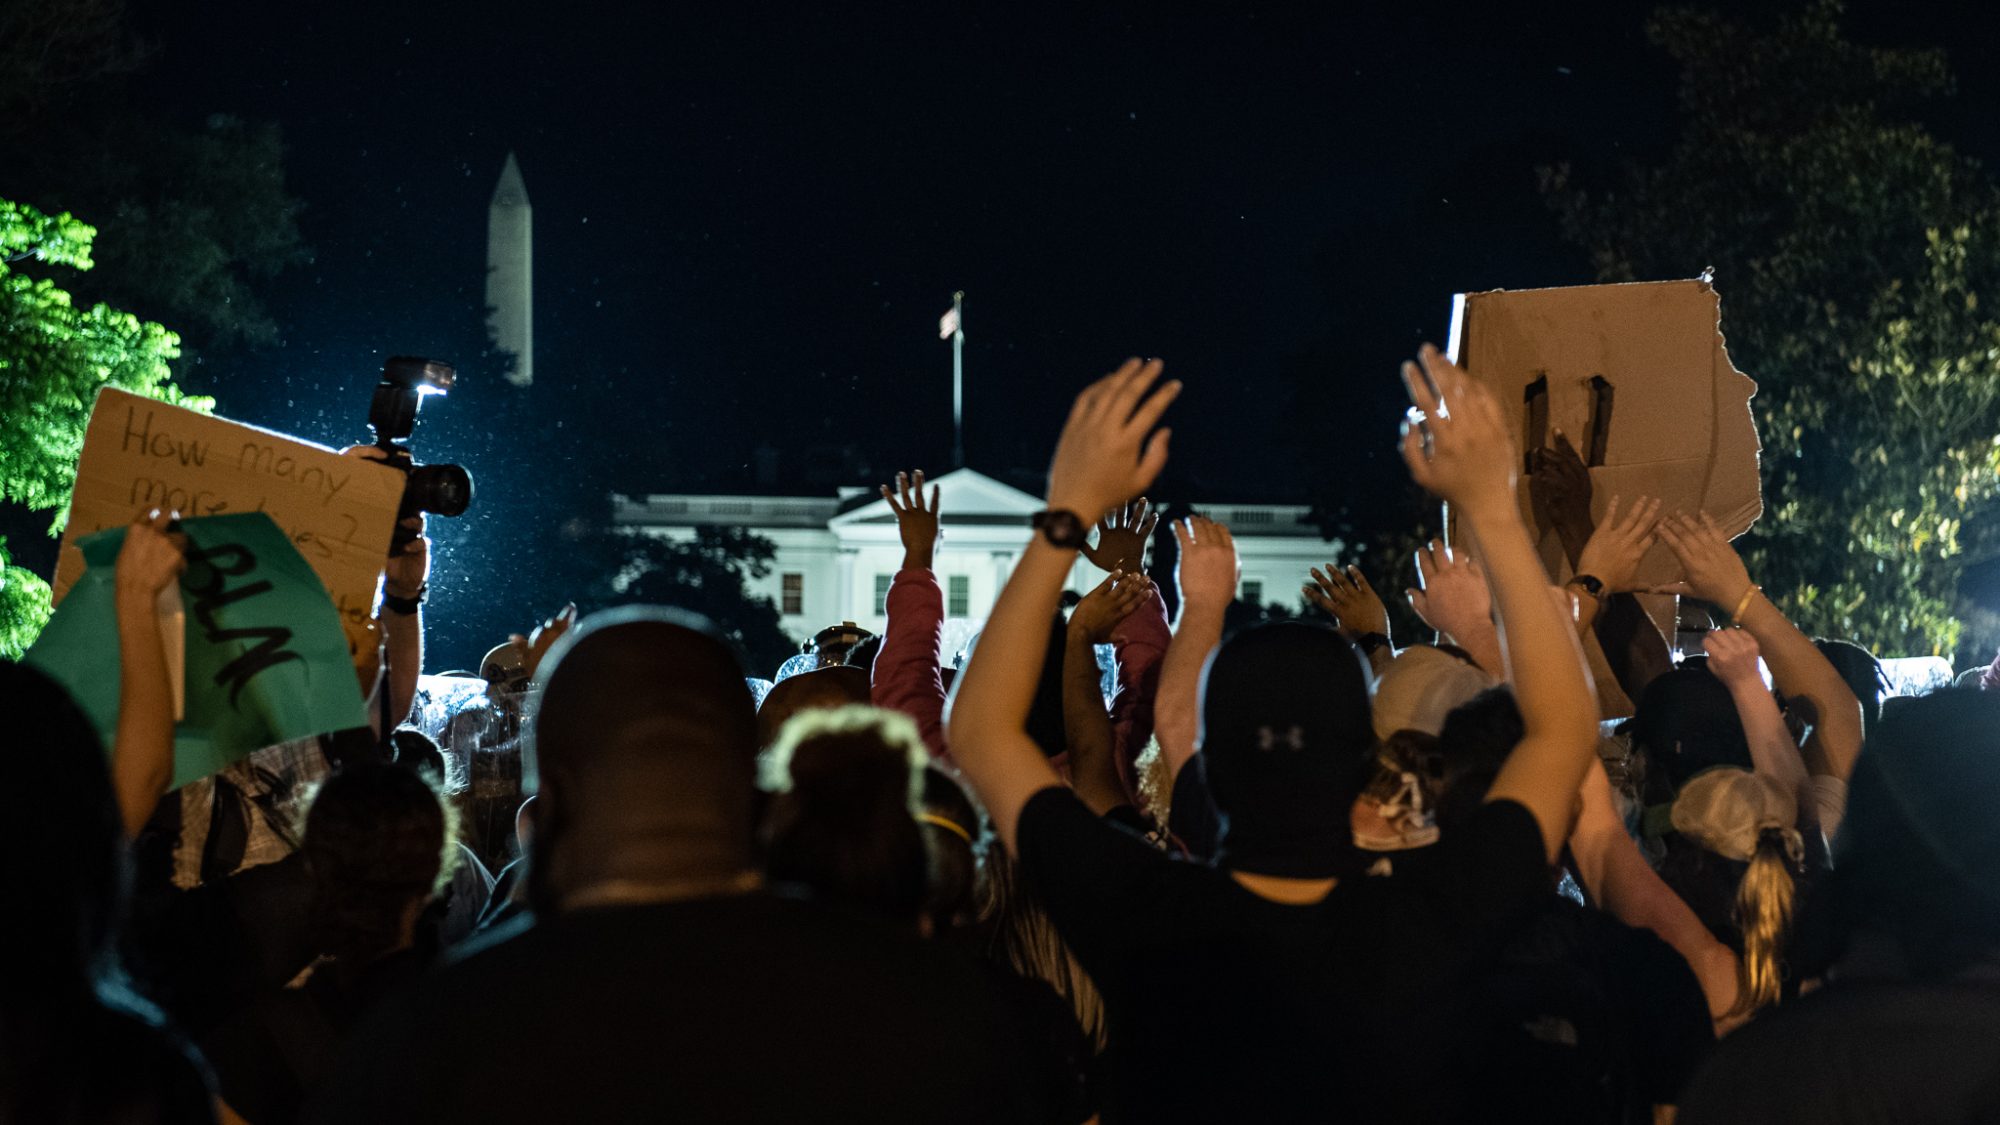 Racial justice protesters stand with their hands raised, with the White House in the background